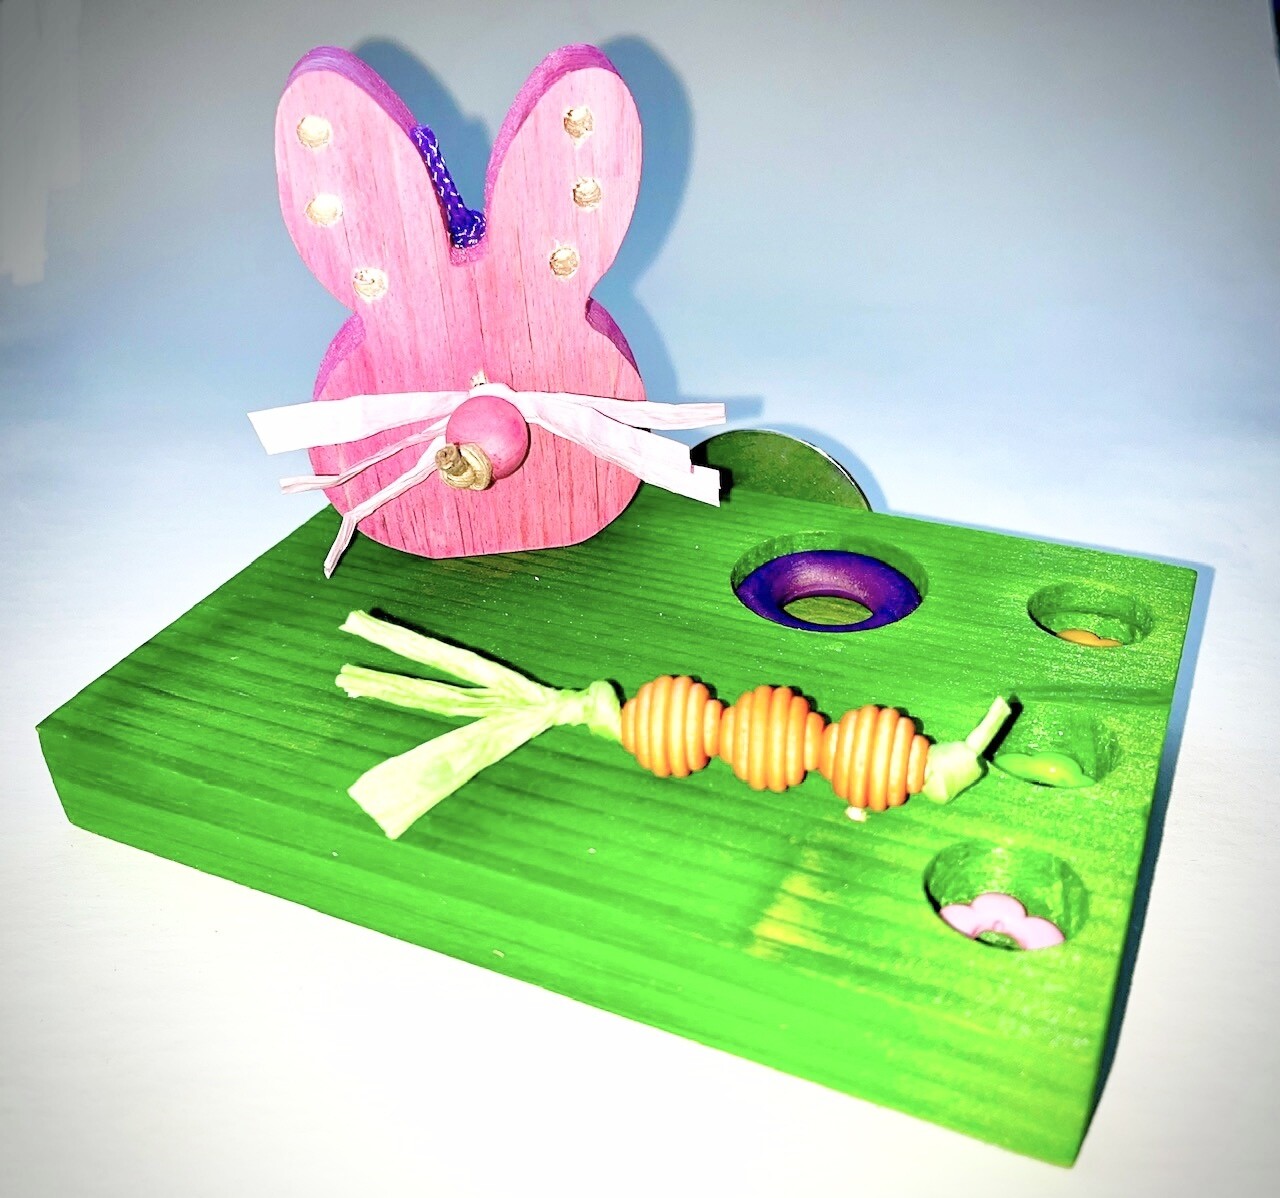 NEW! Bunny Theme Parrot Party Patio - this is our Small Size hand made in USA of Pine, 5" x 7" made by Bite Me Birdie